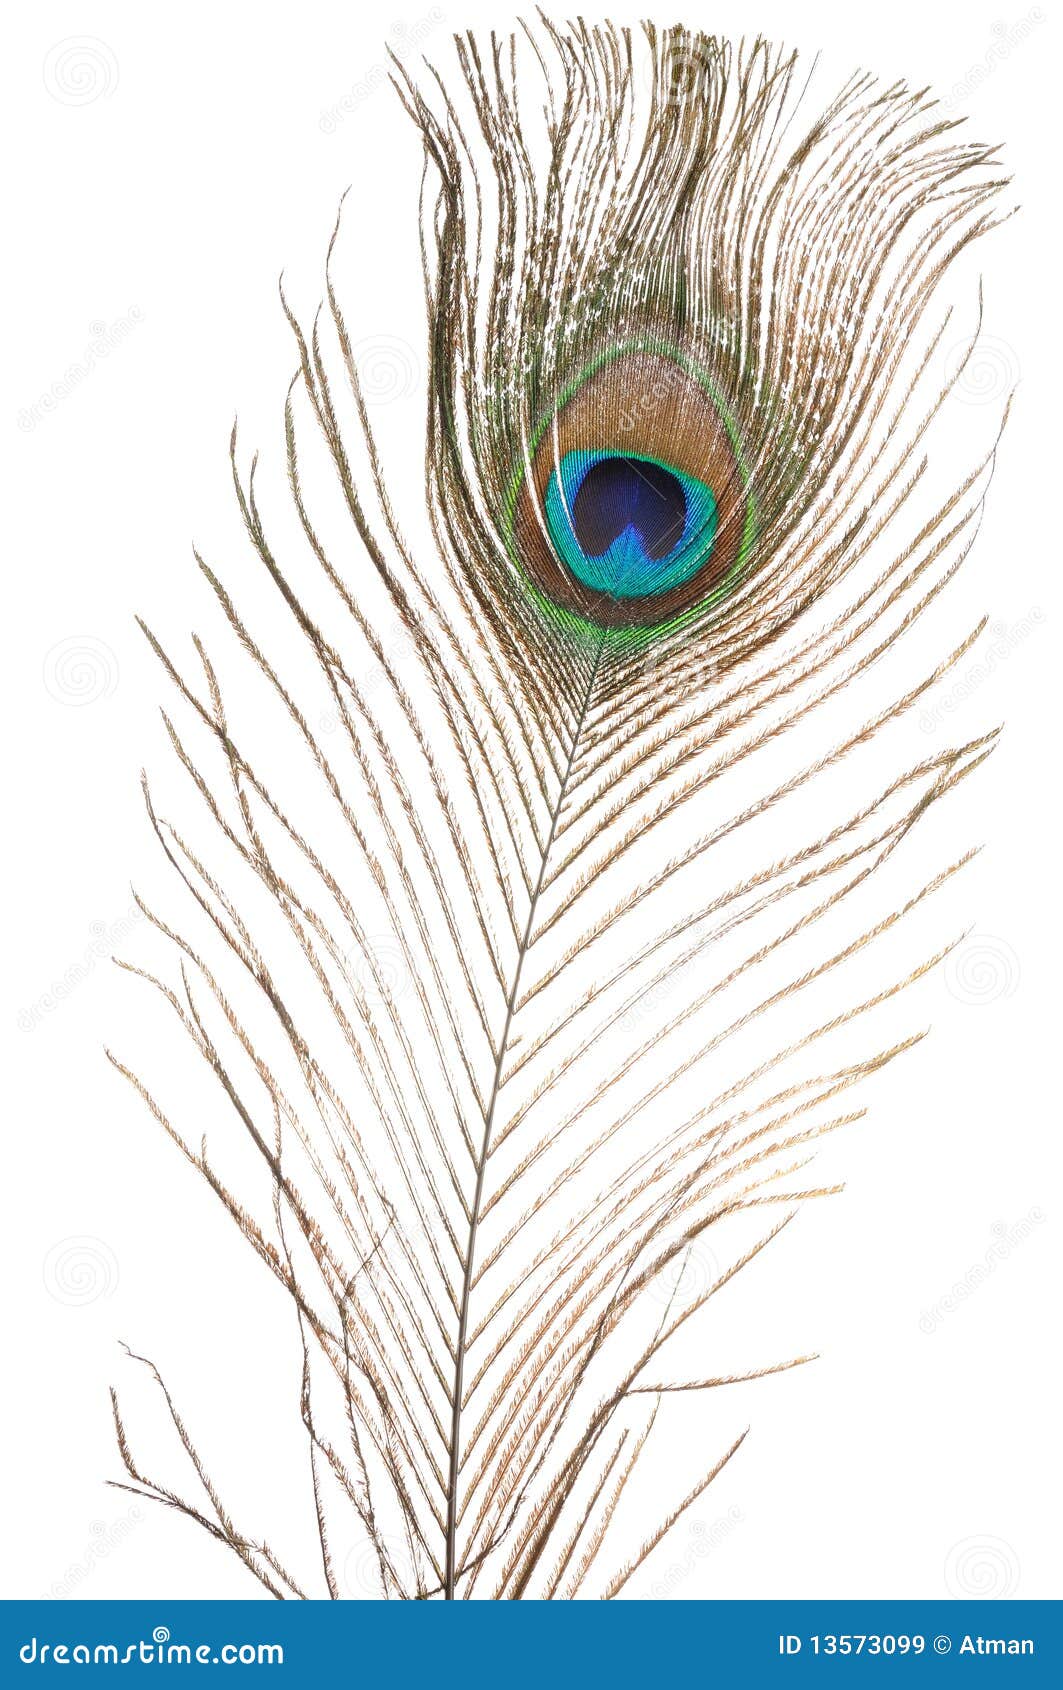 Peacock feather stock image. Image of feather, plumage - 13573099